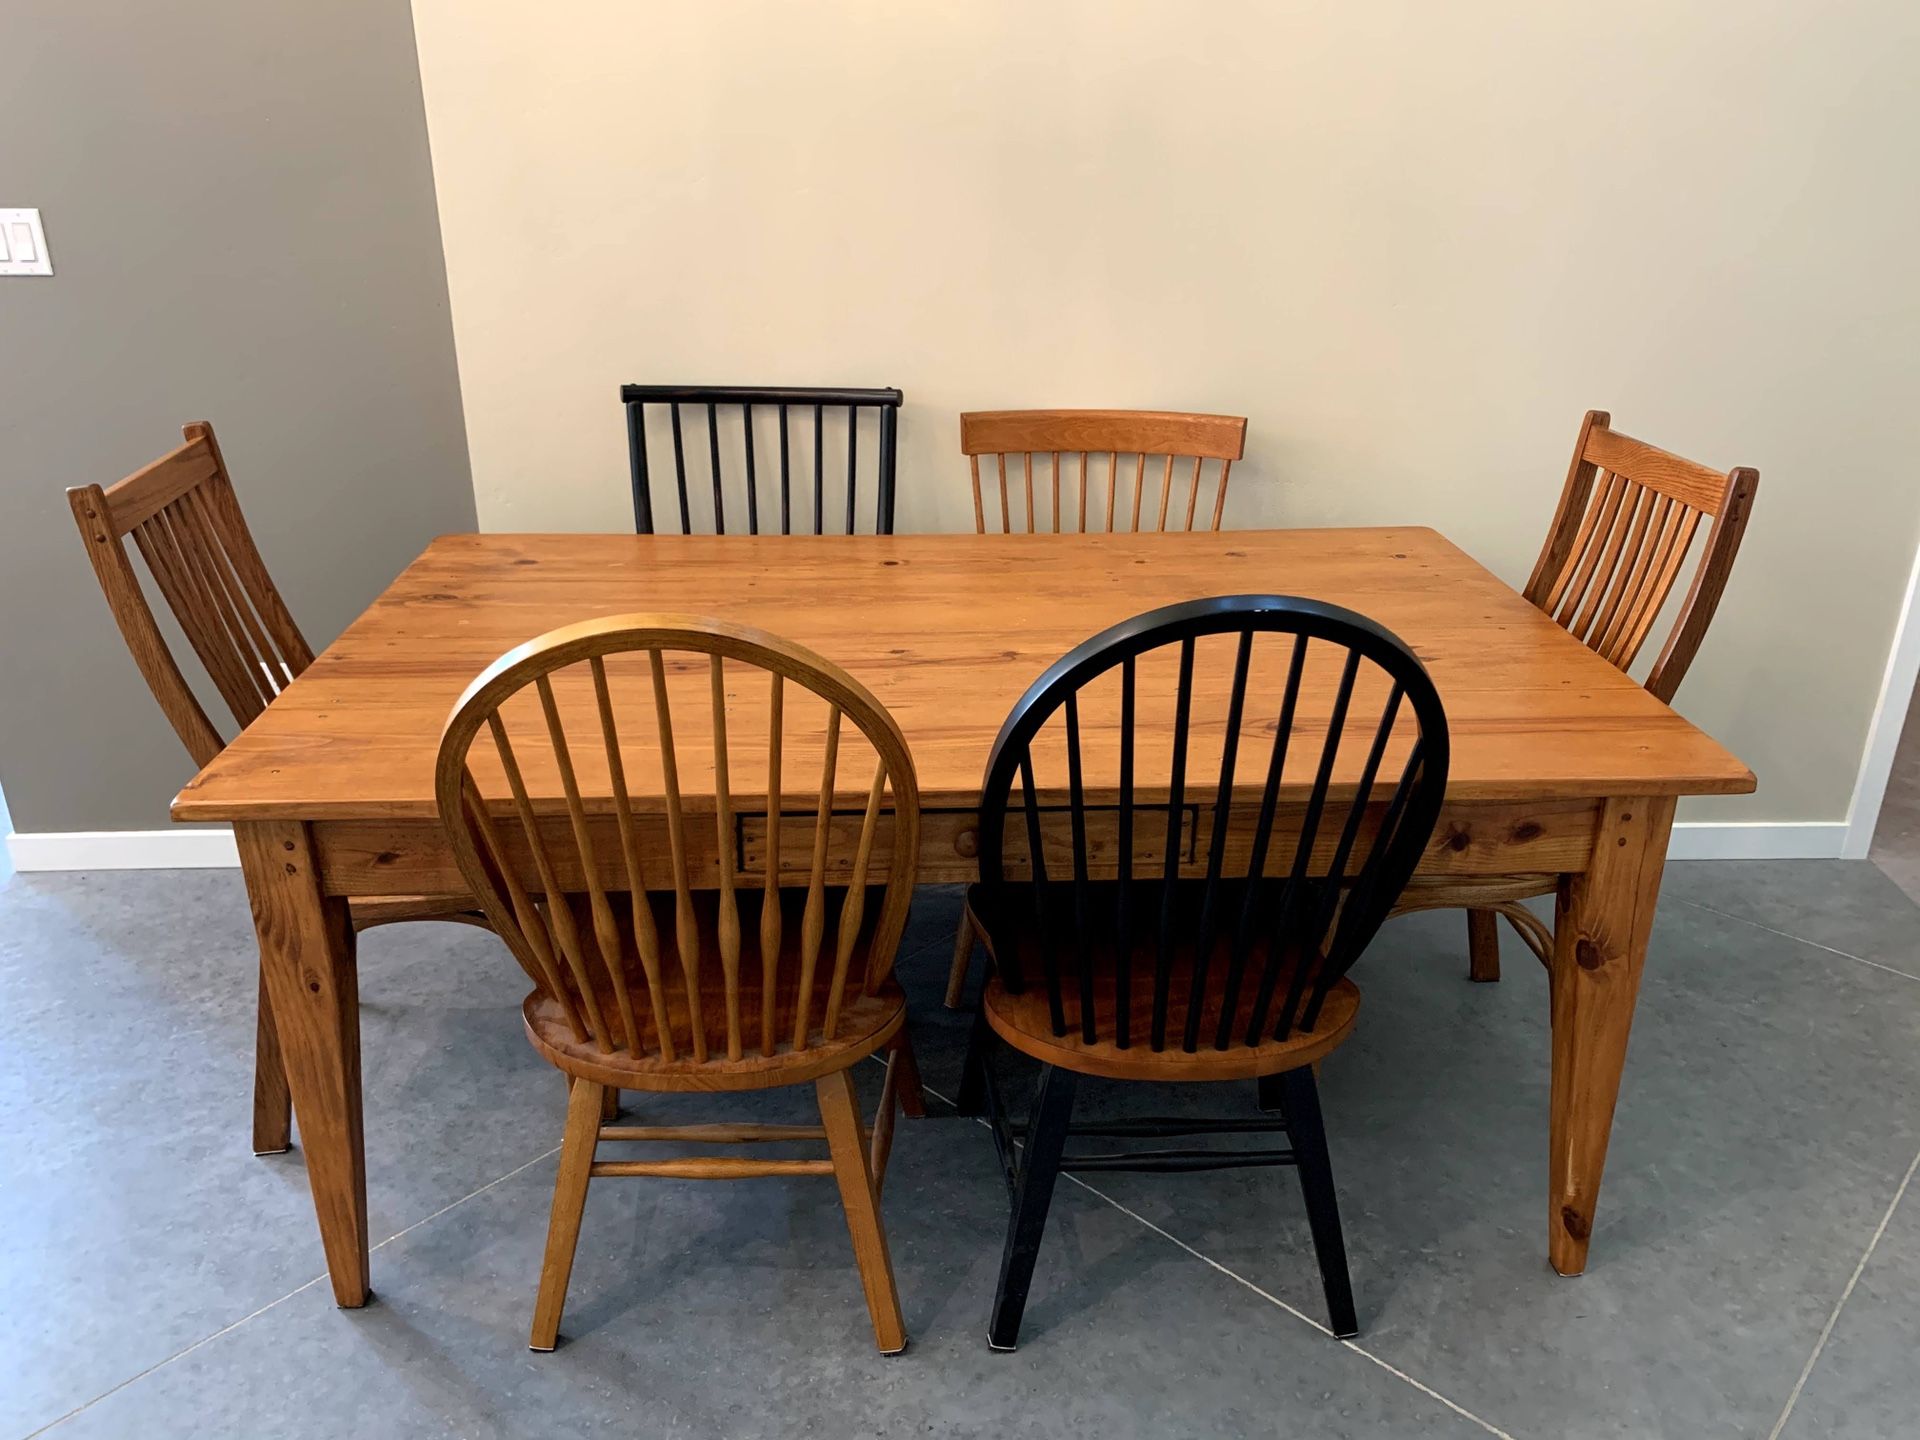 Kitchen/Dining Farm Table - $1100 OBO